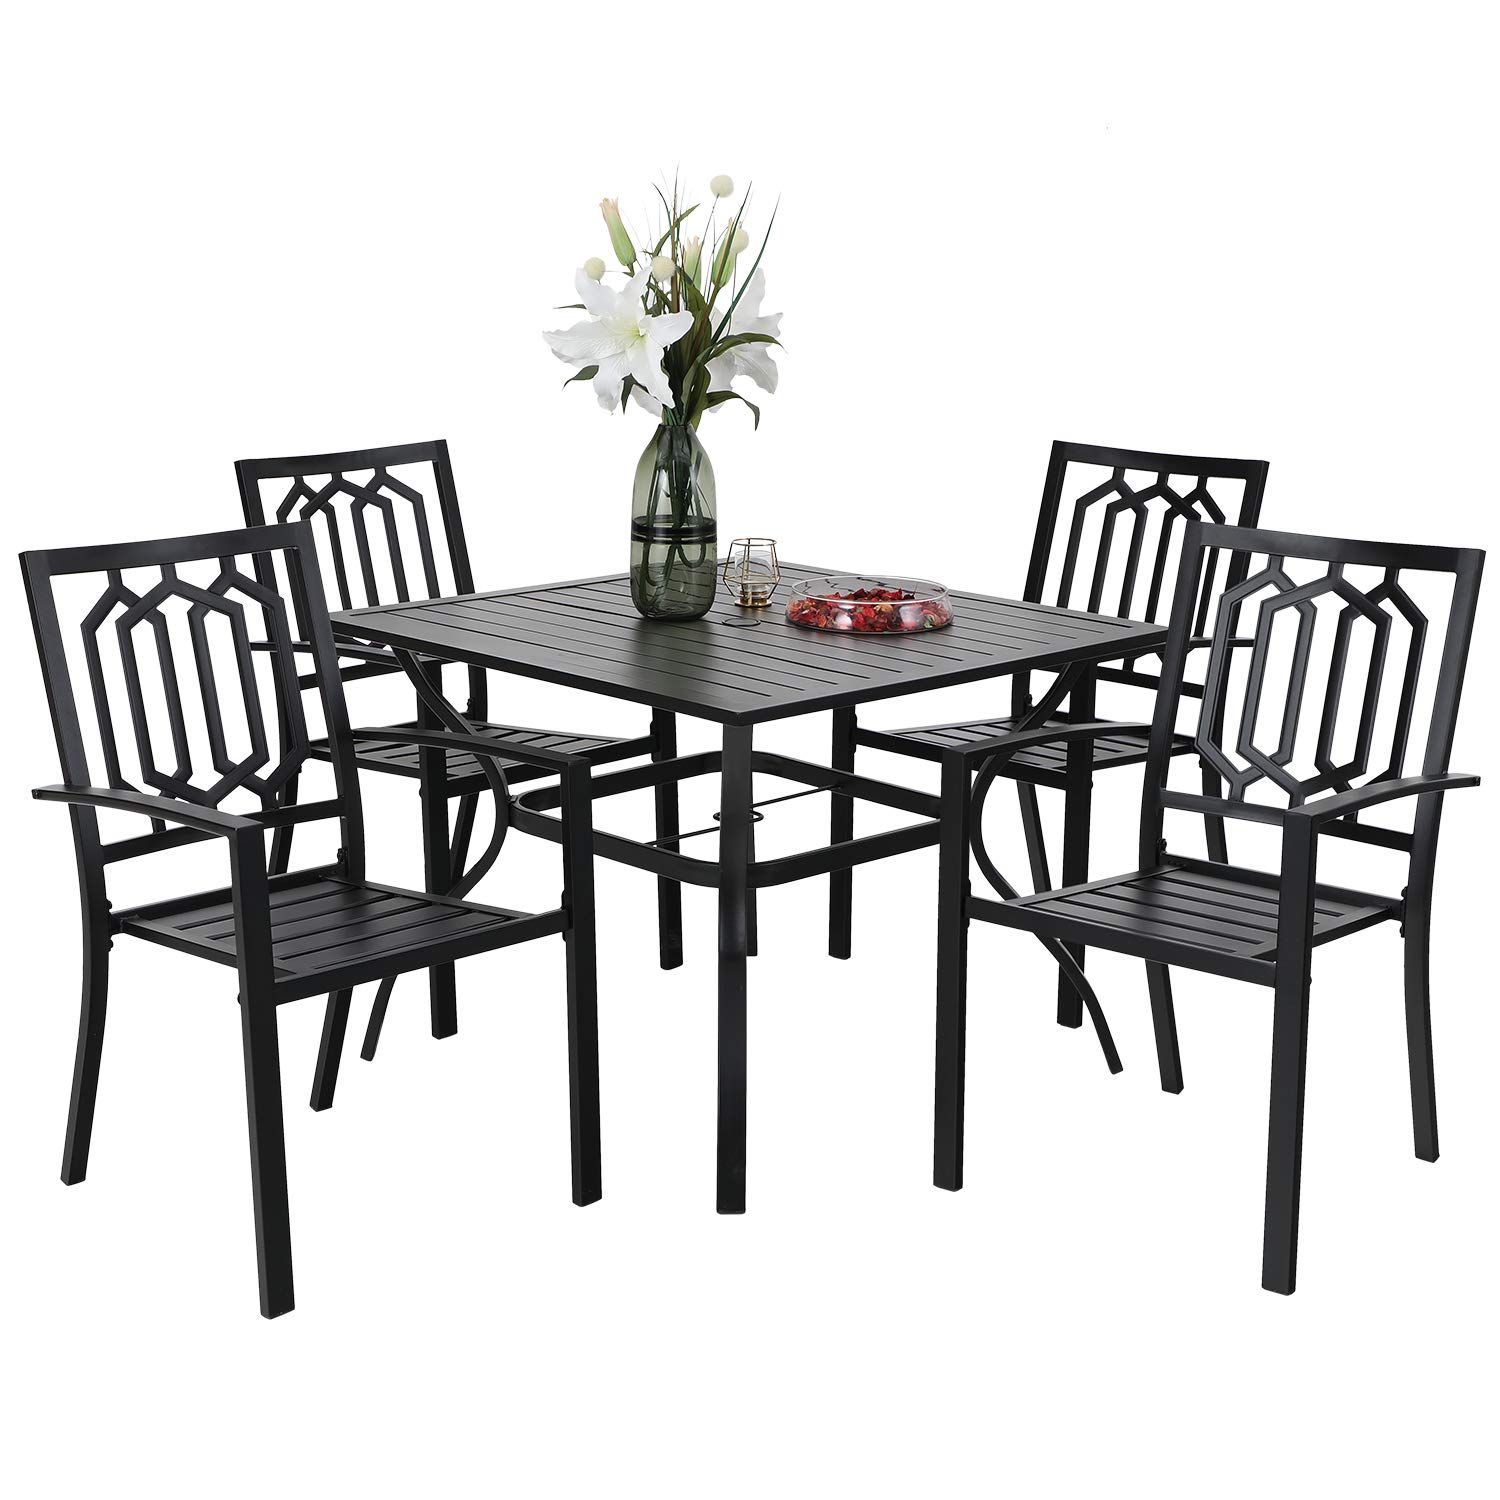 Mf Studio 5 Piece Metal Patio Outdoor Table And Chairs Dining Set, 37 Inside 5 Piece Cafe Dining Sets (View 12 of 15)